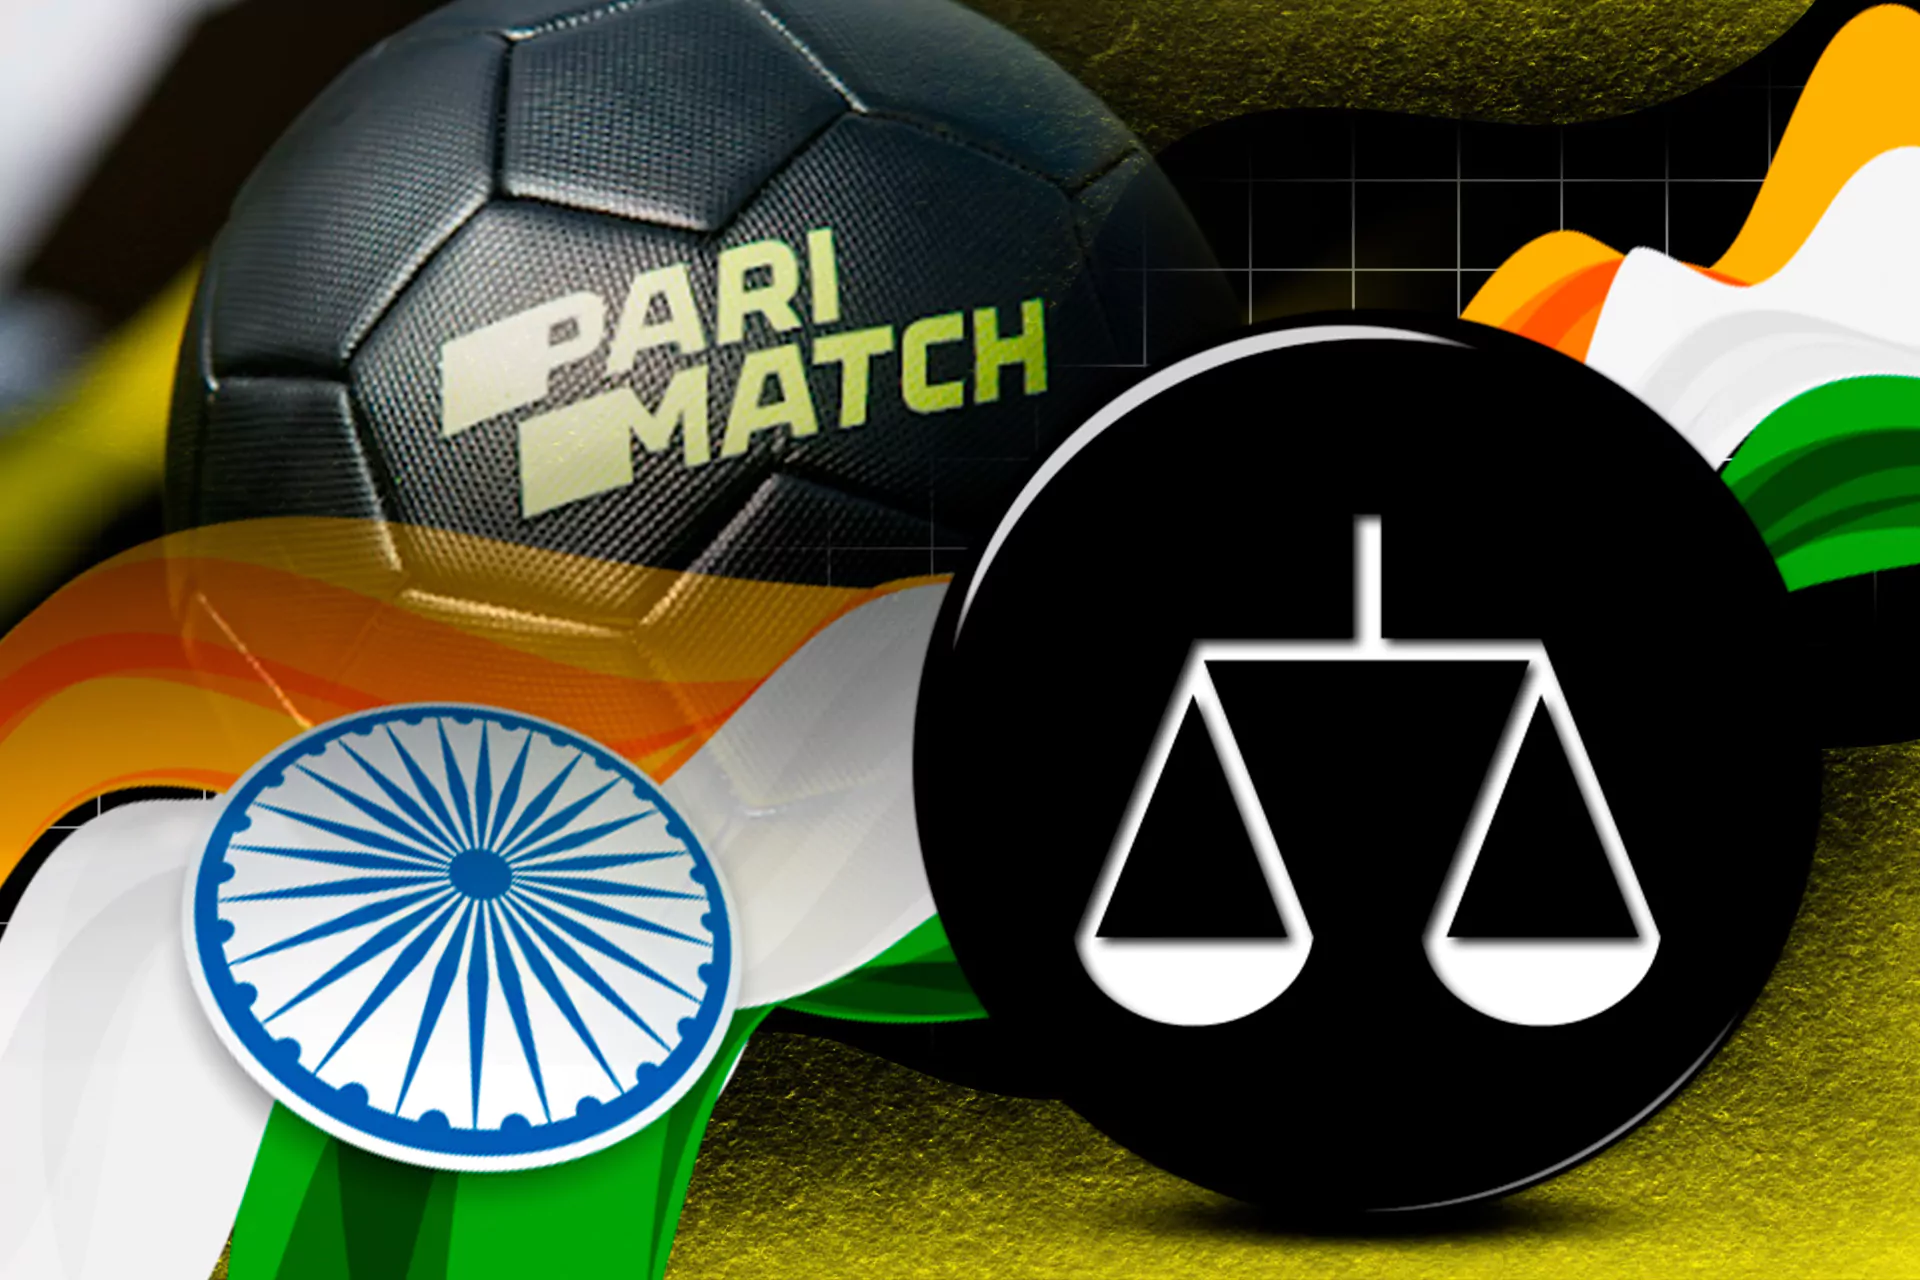 Parimatch is absoluteley legal for betting in India.